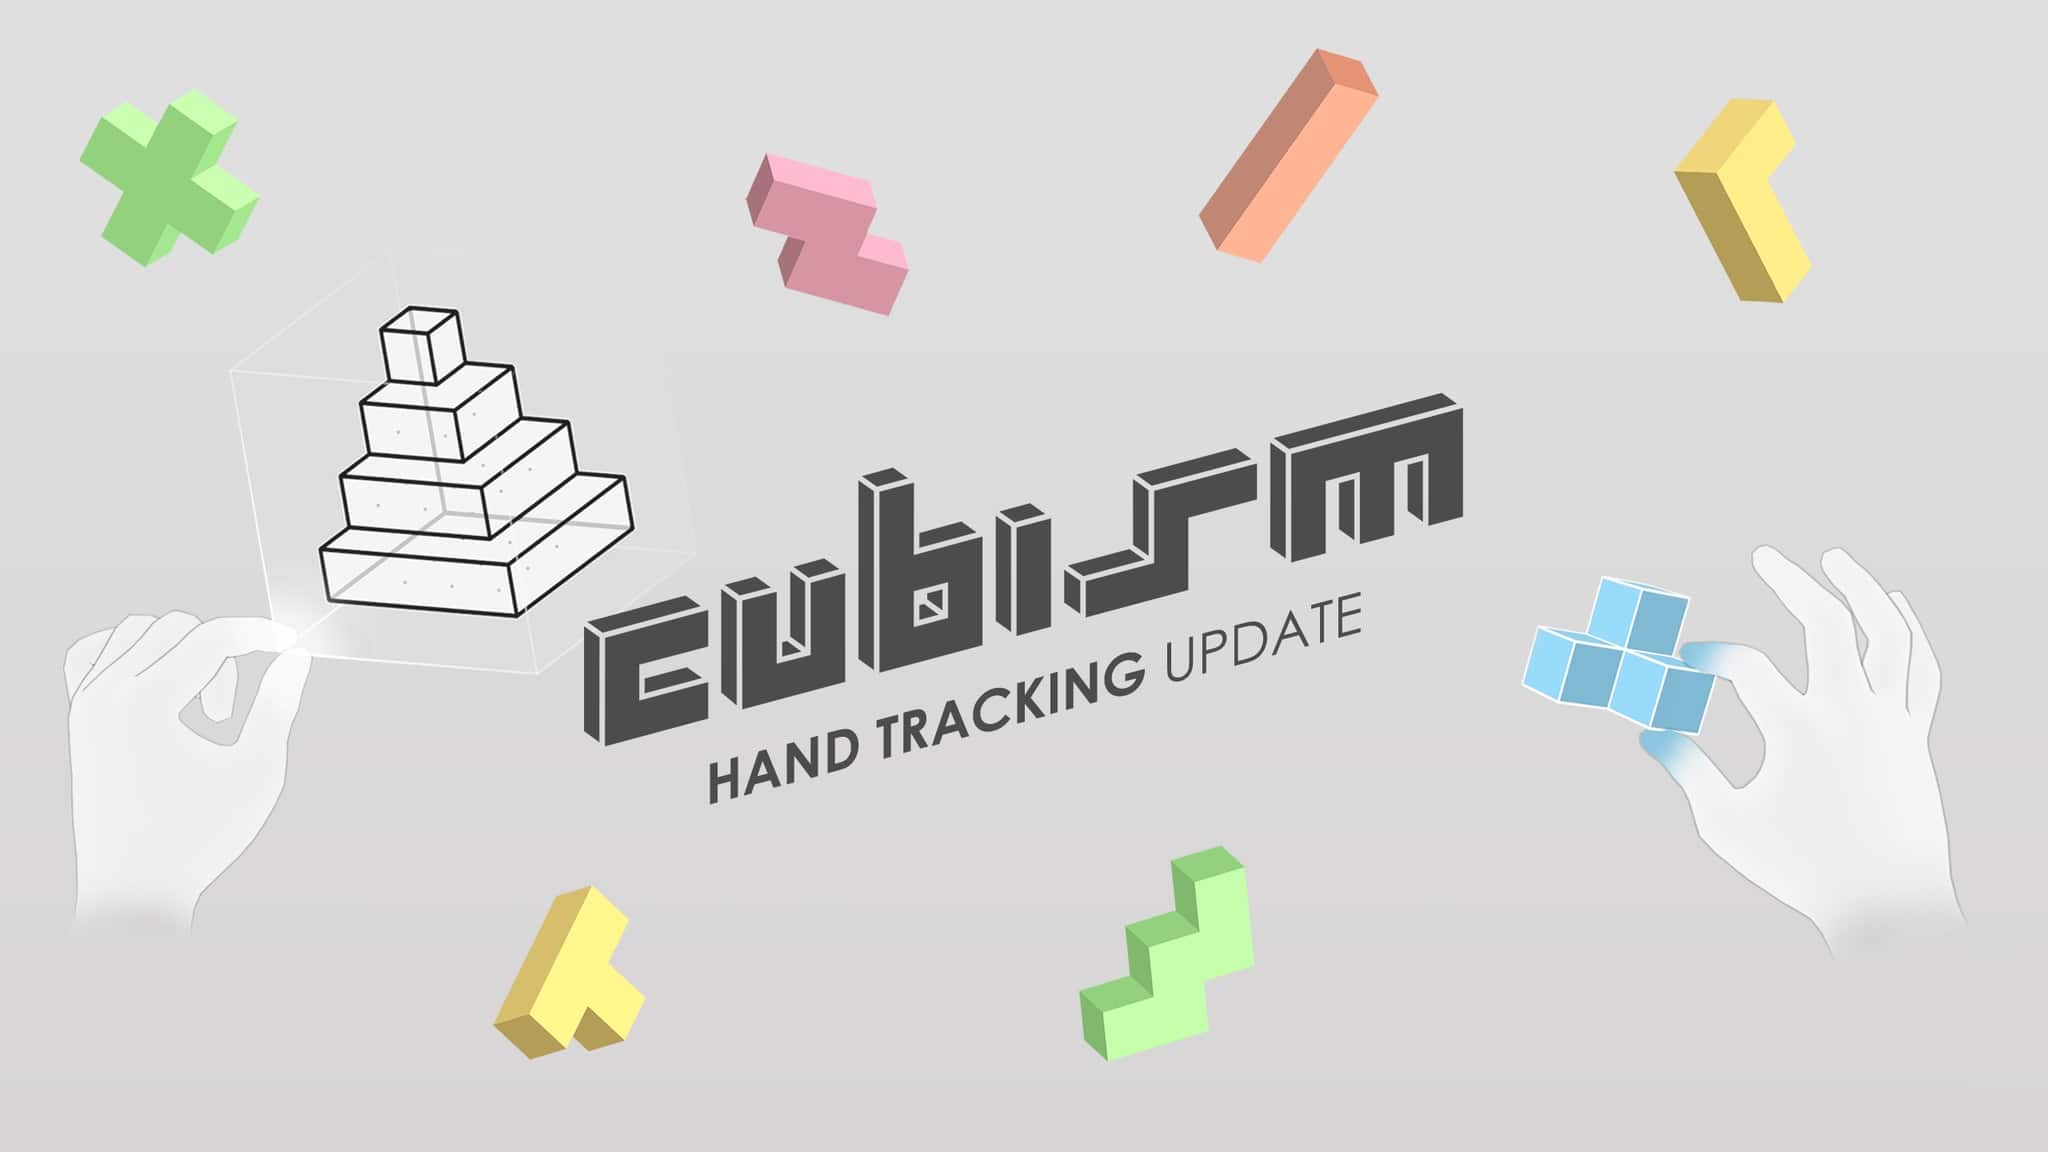 Case Study: The Design Behind ‘Cubism’s’ Hand-tracking – Road to VR